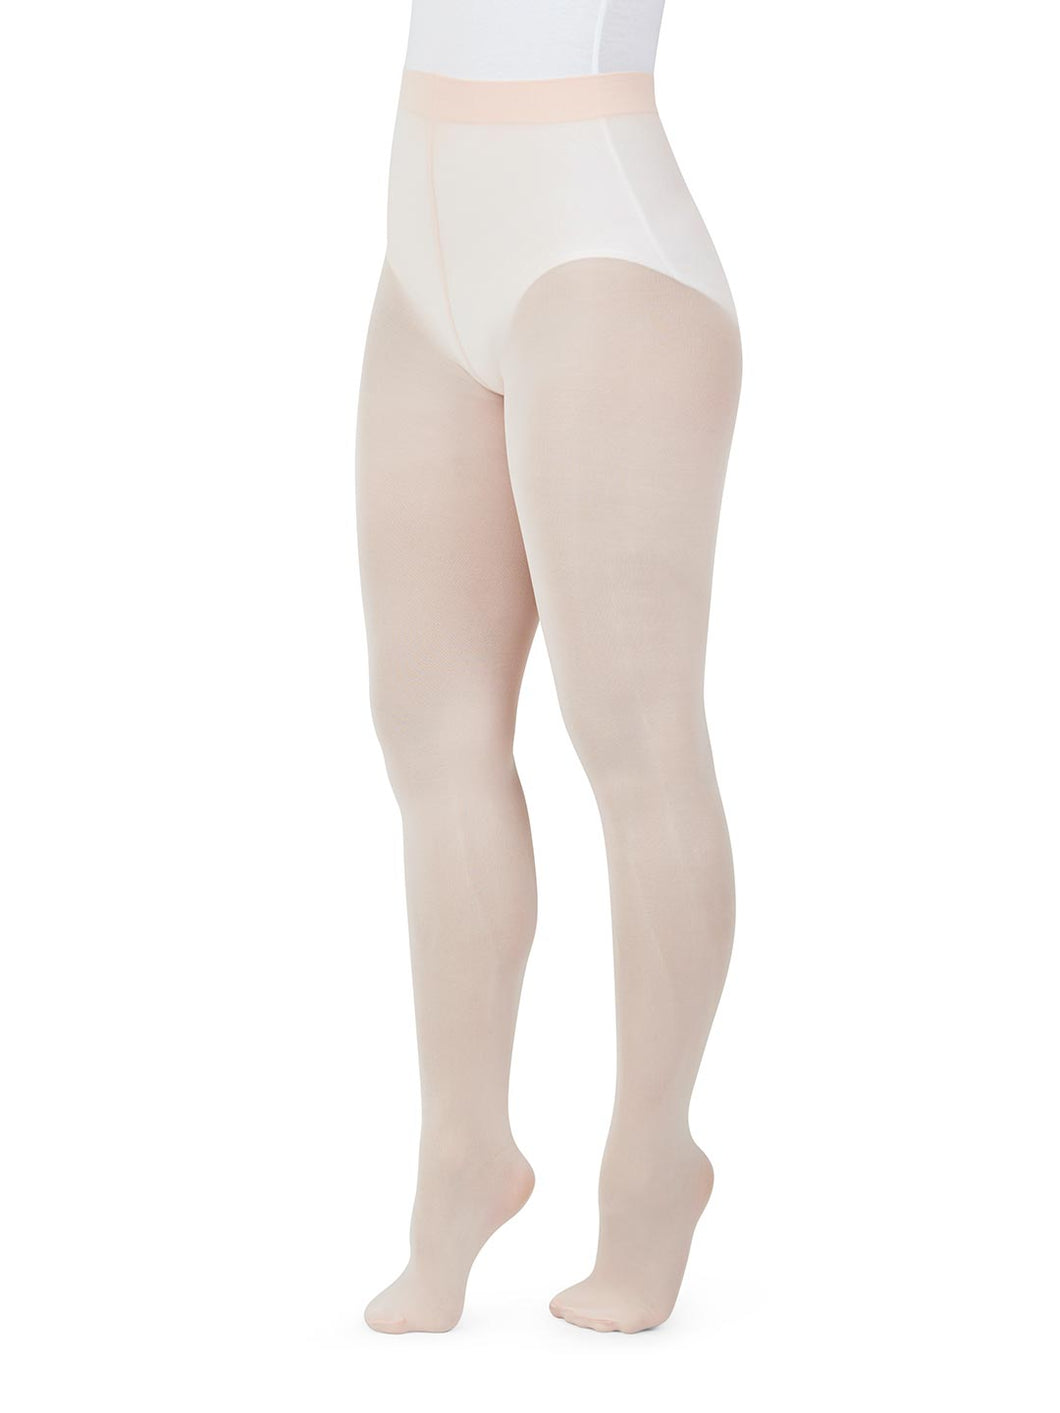 Capezio Ultra Soft  Footed Adult Tights; #1915,